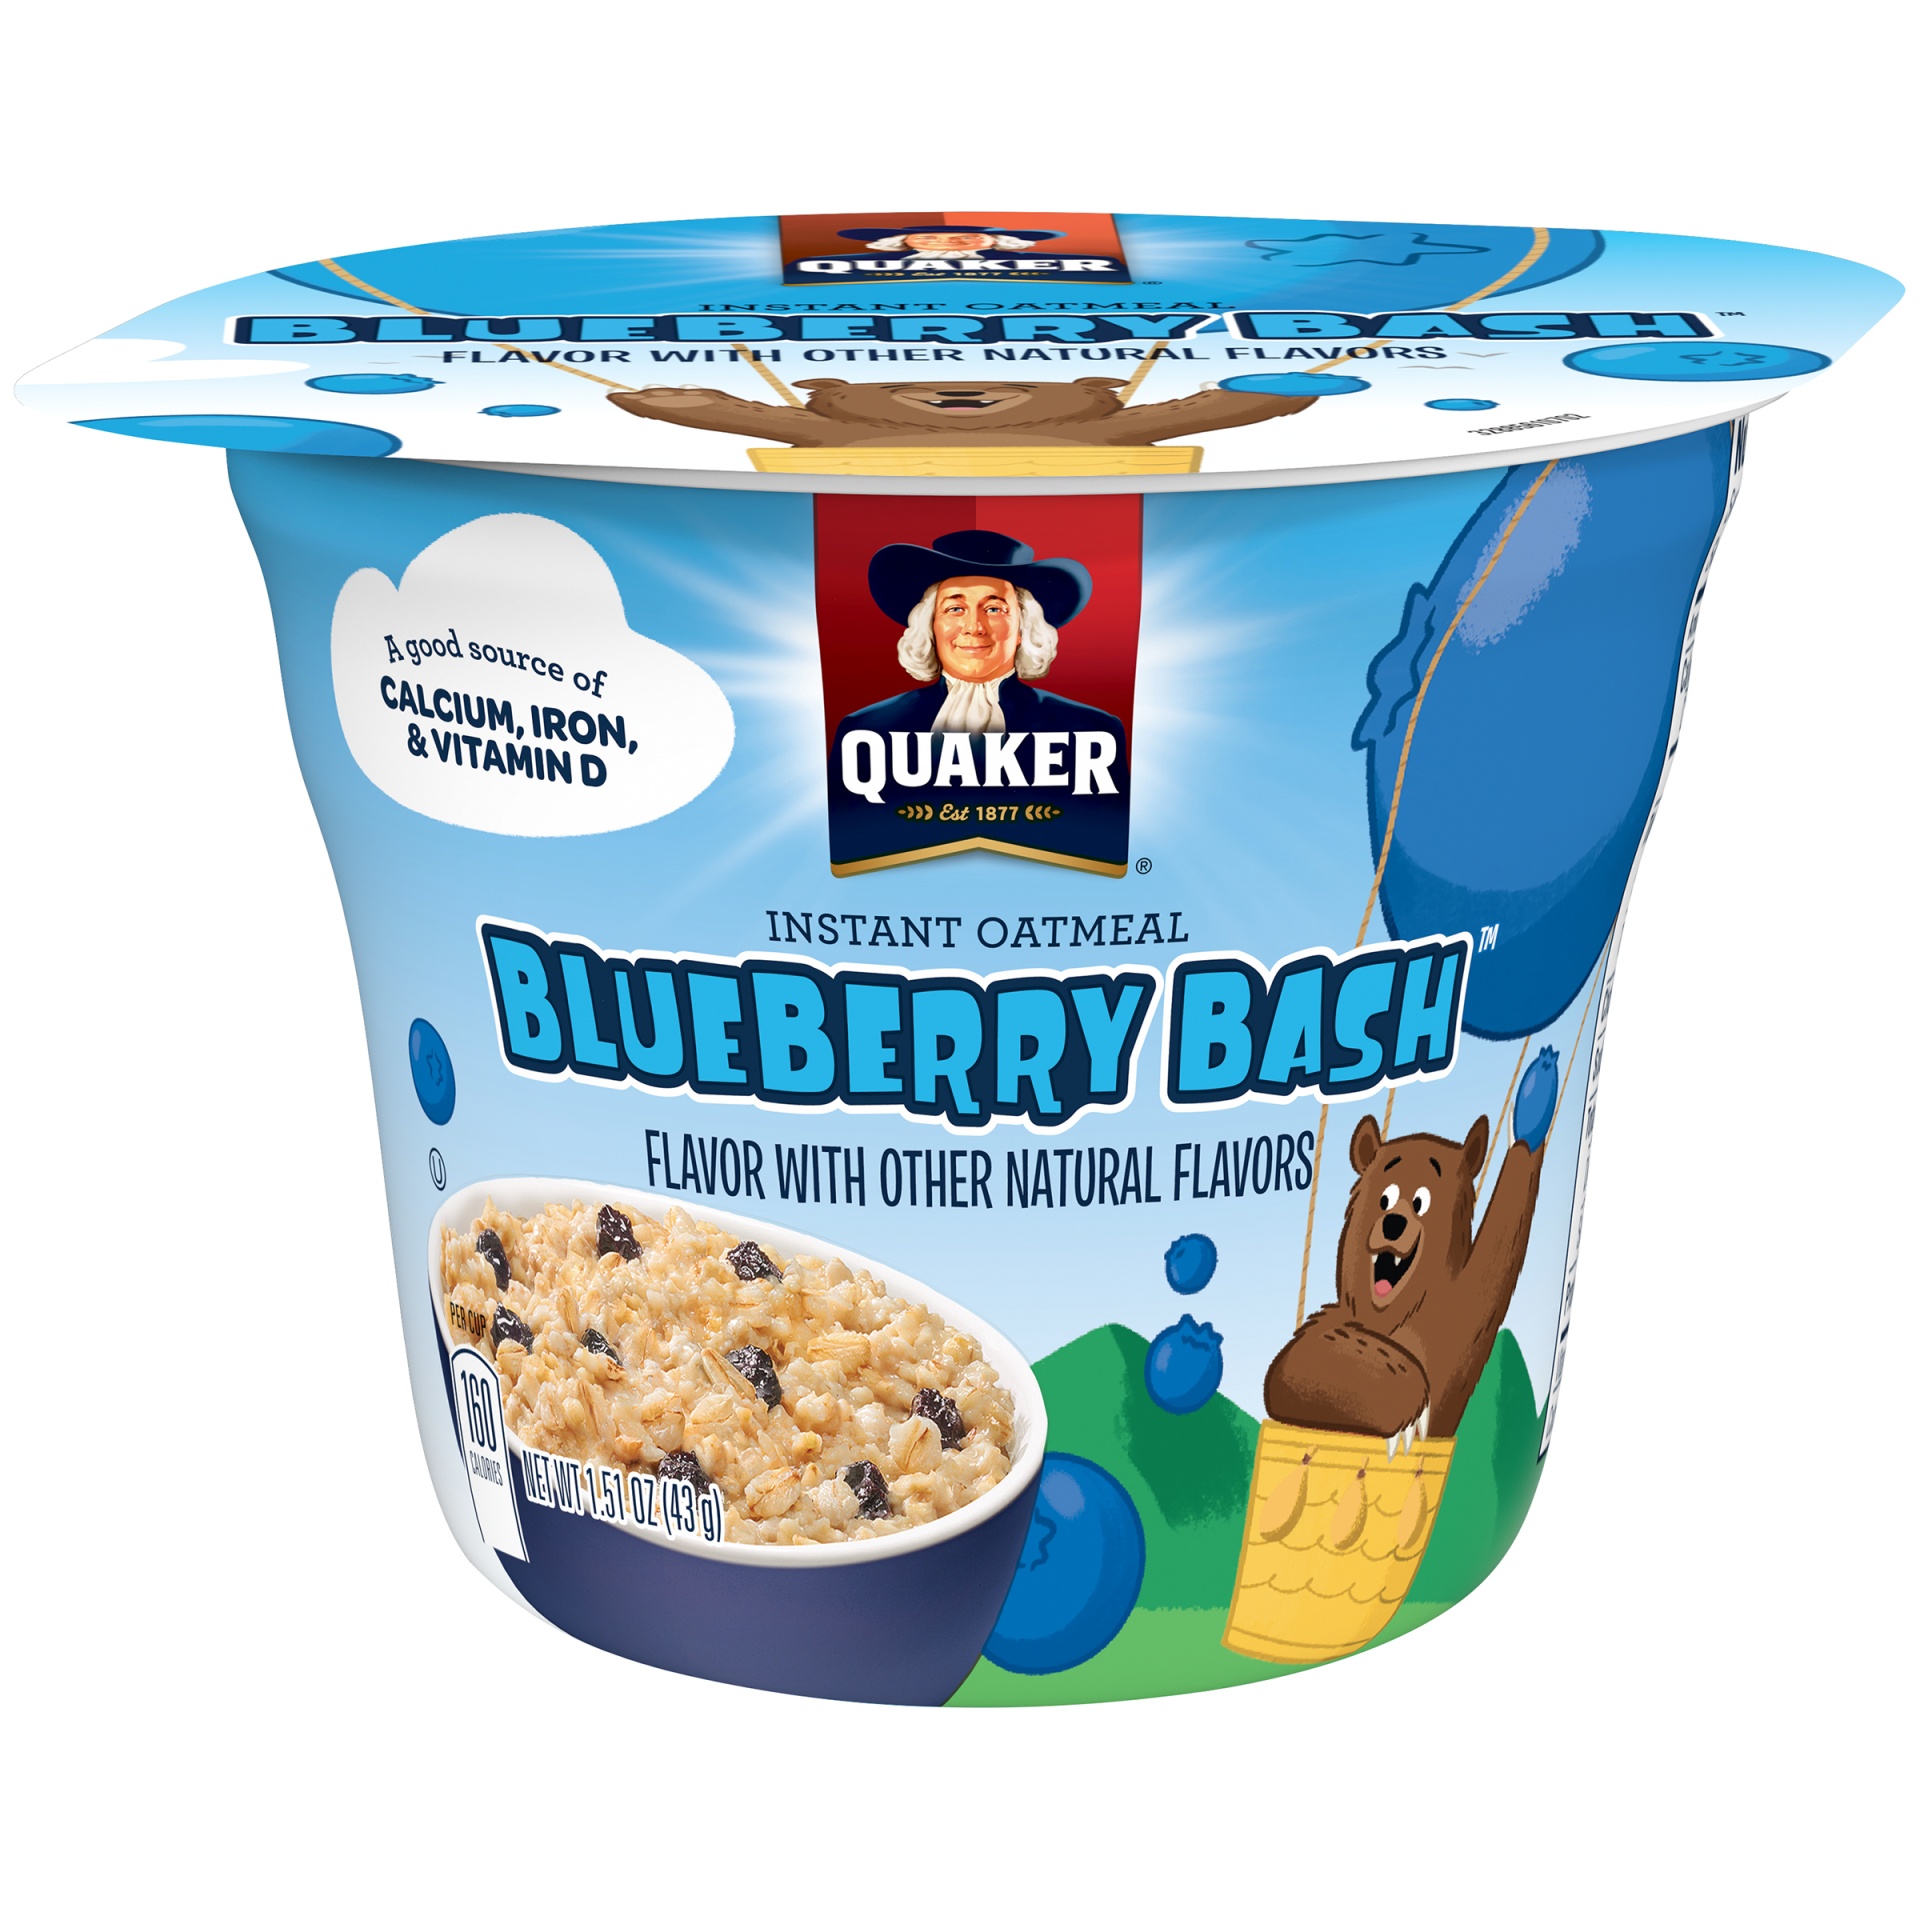 slide 1 of 1, Quaker Blueberry Bash Instant Oatmeal Cup, 1.51 oz